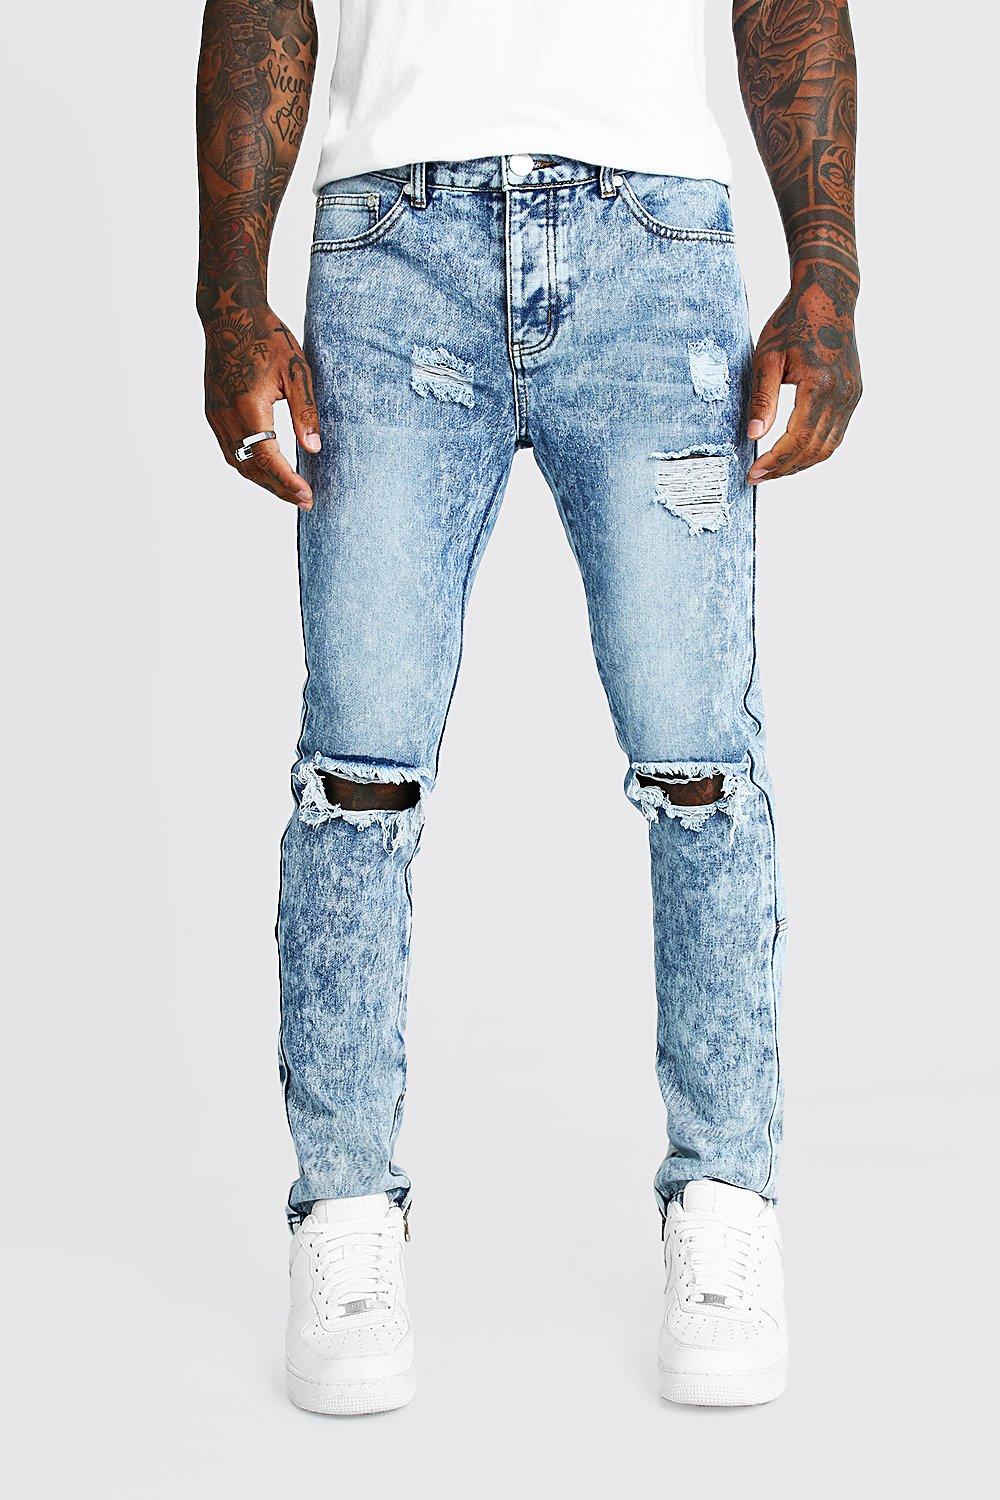 ankle jeans canada